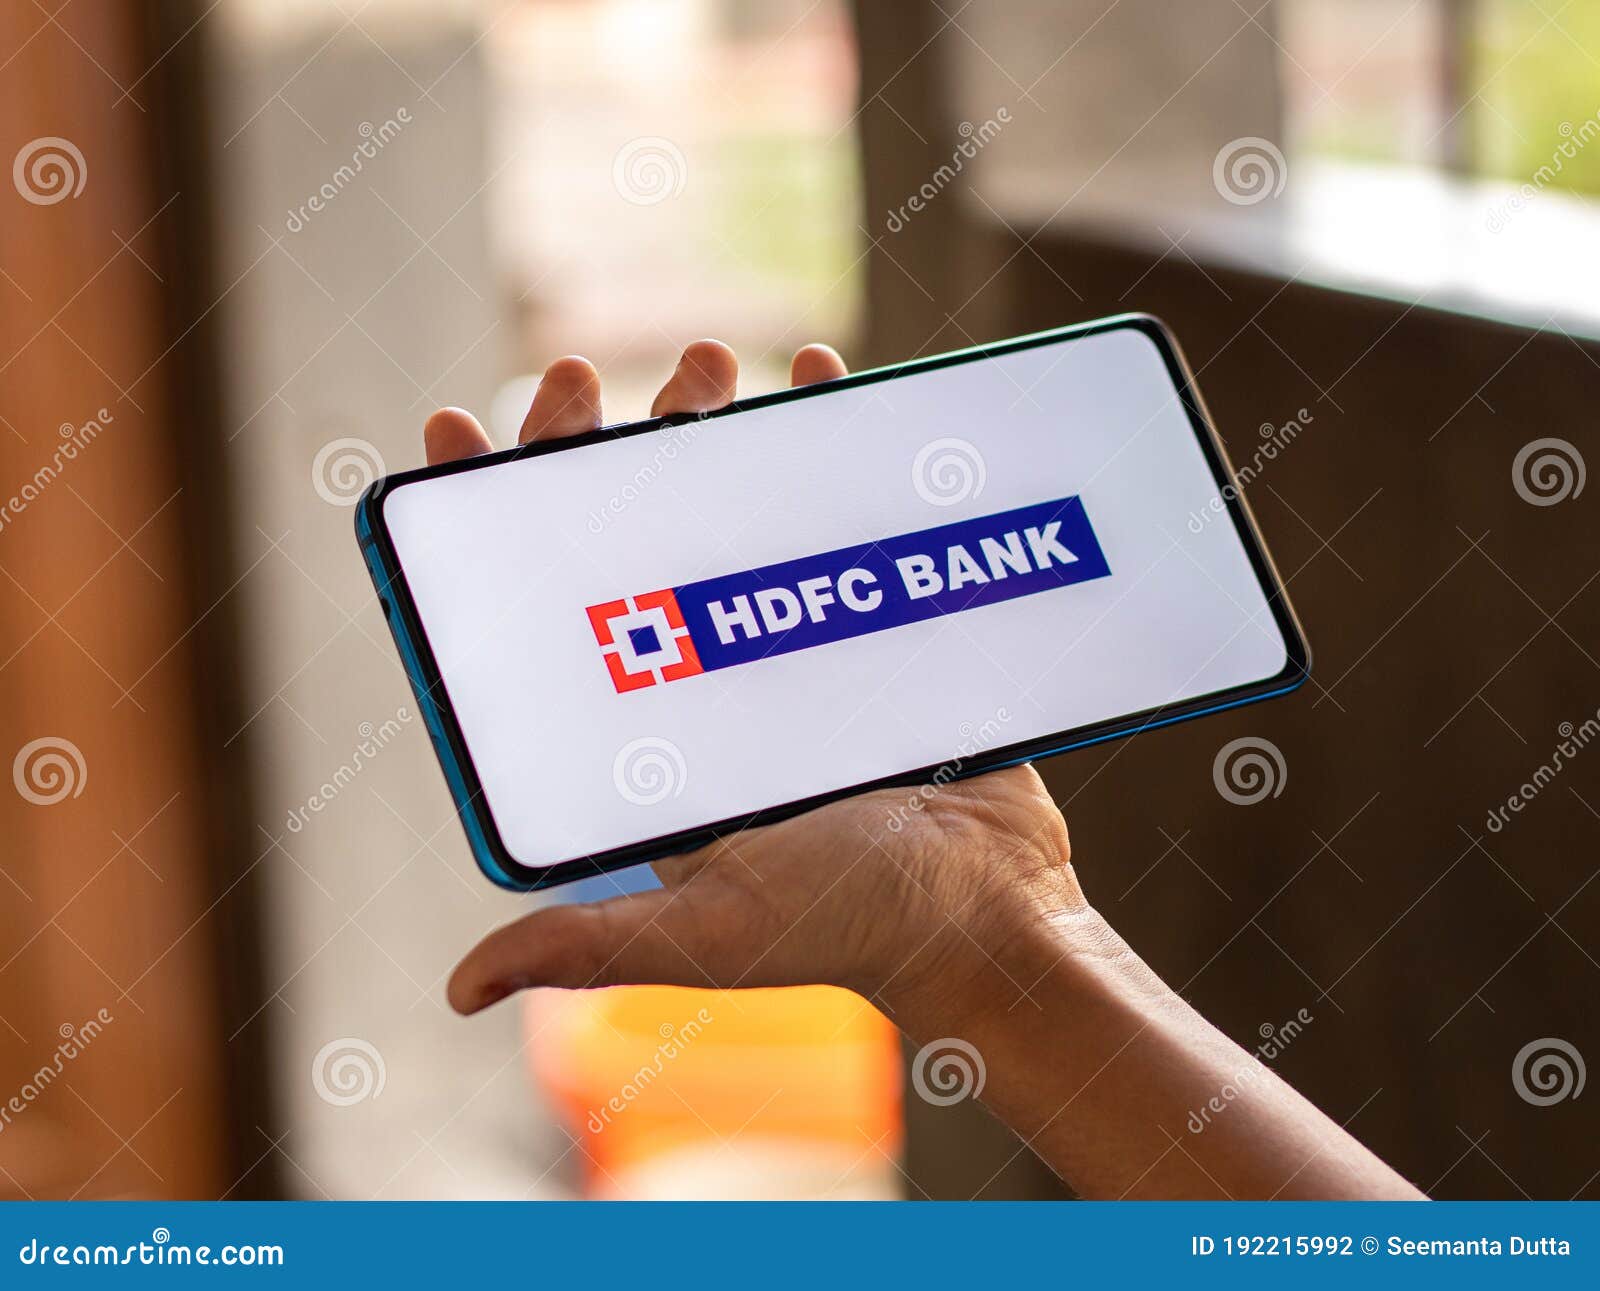 HDFC Banks future performance hinges on execution of merger synergies